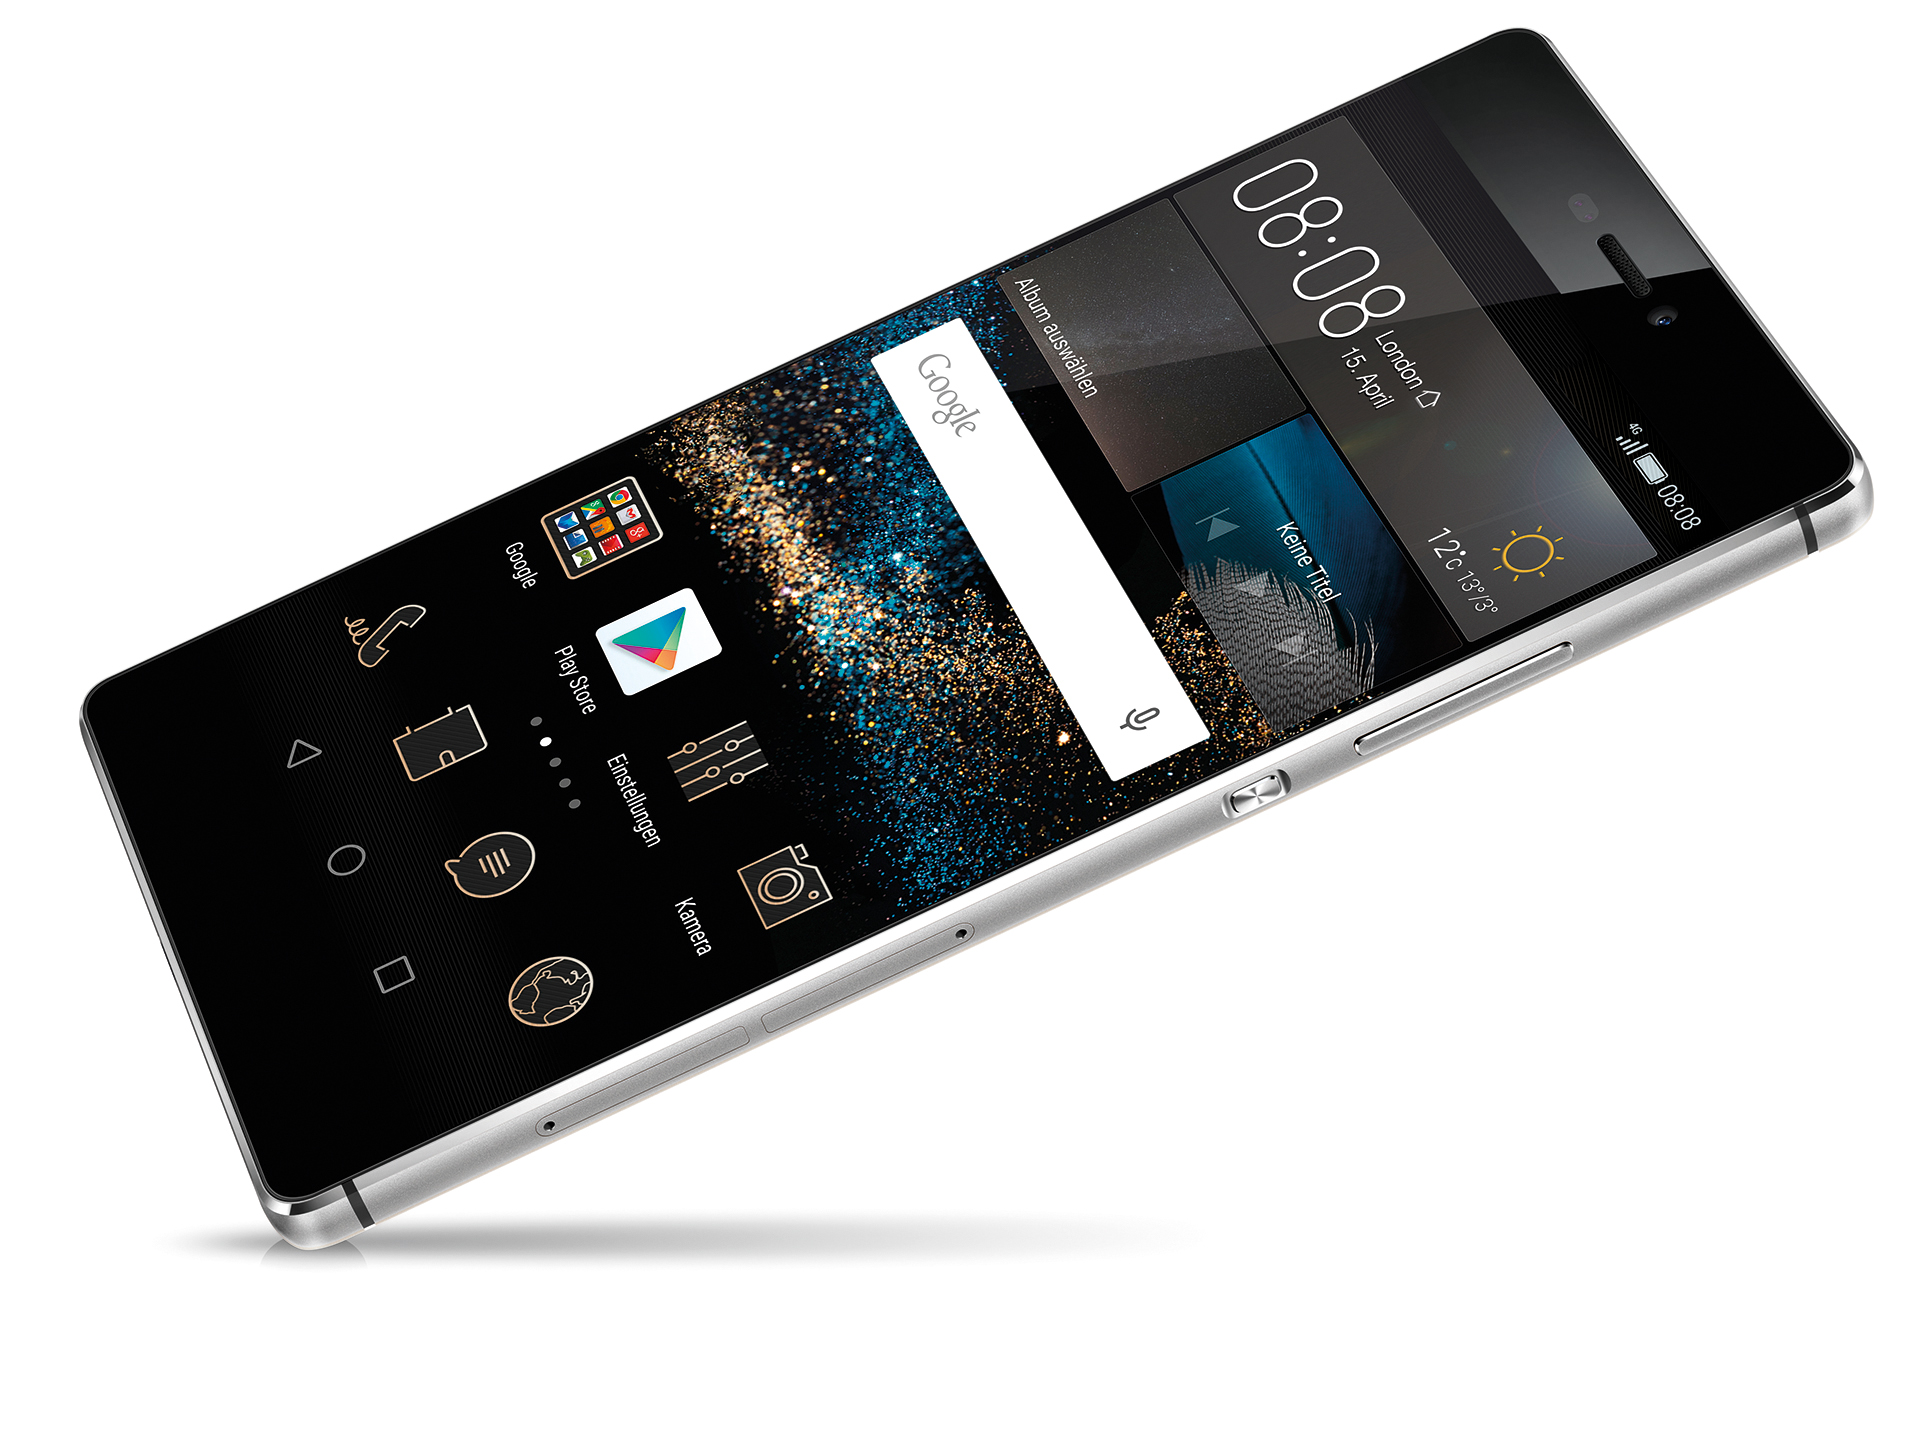 fragment Federaal Clip vlinder Huawei P8 Smartphone First Impressions - NotebookCheck.net Reviews